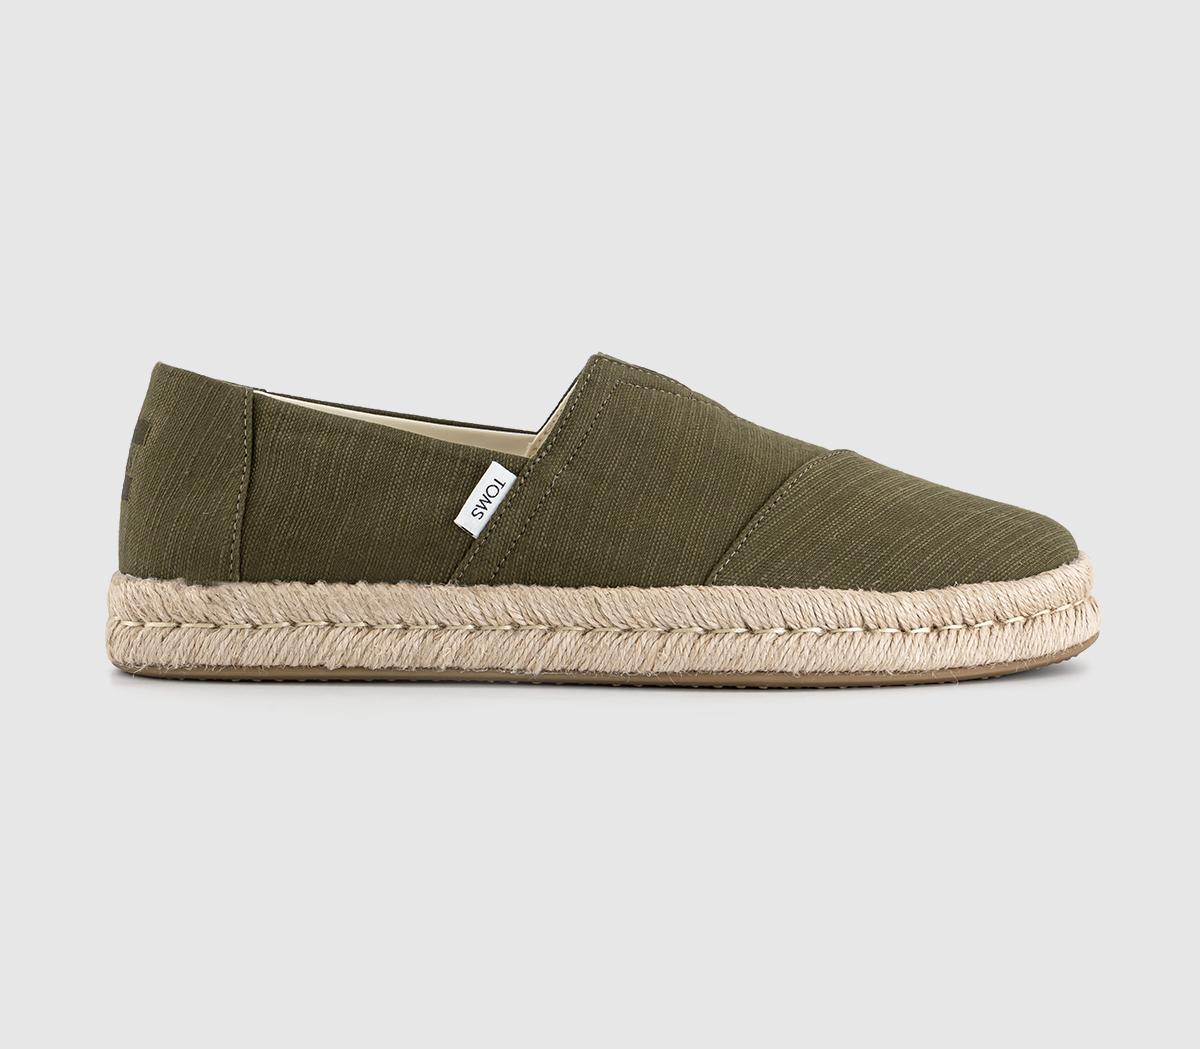 TOMSAlpargata Rope 2.0 Slip OnsOlive Recycled Cotton Slubby Woven